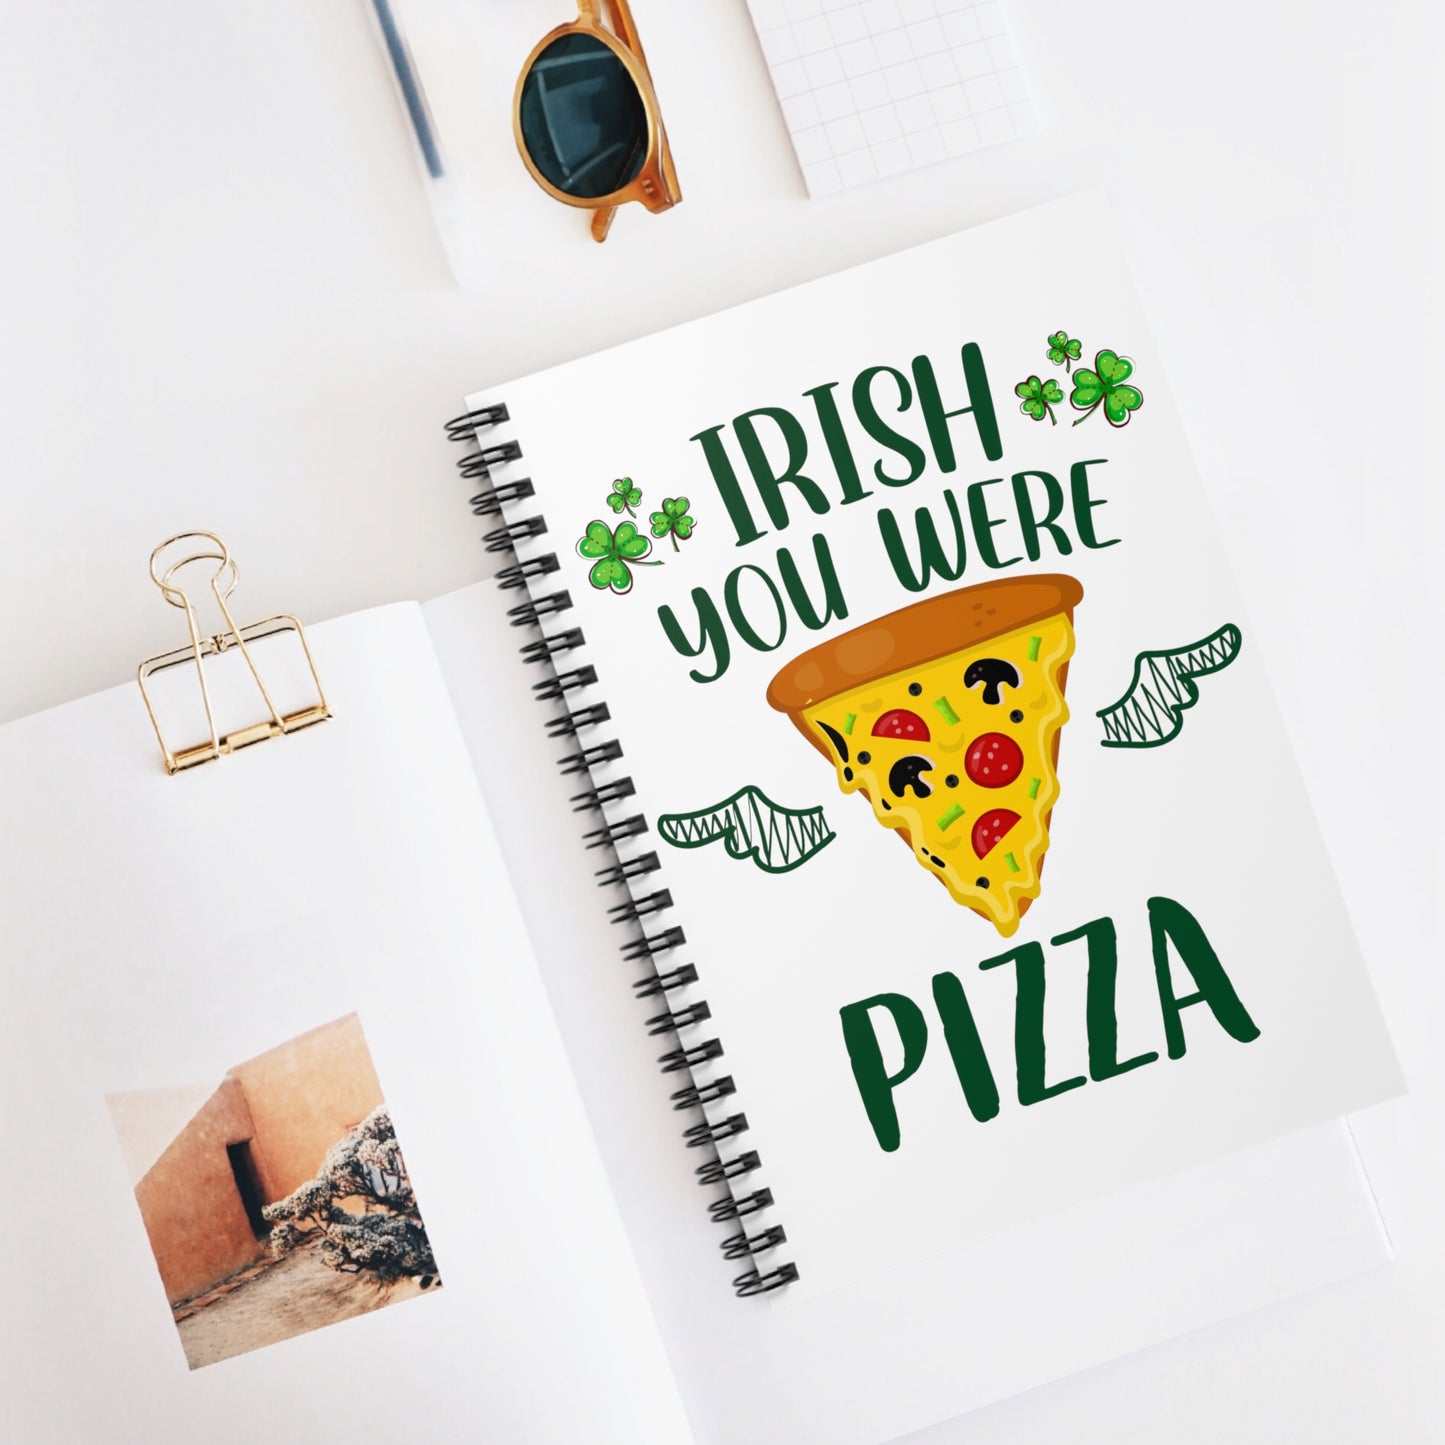 Irish You Were Pizza: Spiral Notebook - Log Books - Journals - Diaries - and More Custom Printed by TheGlassyLass